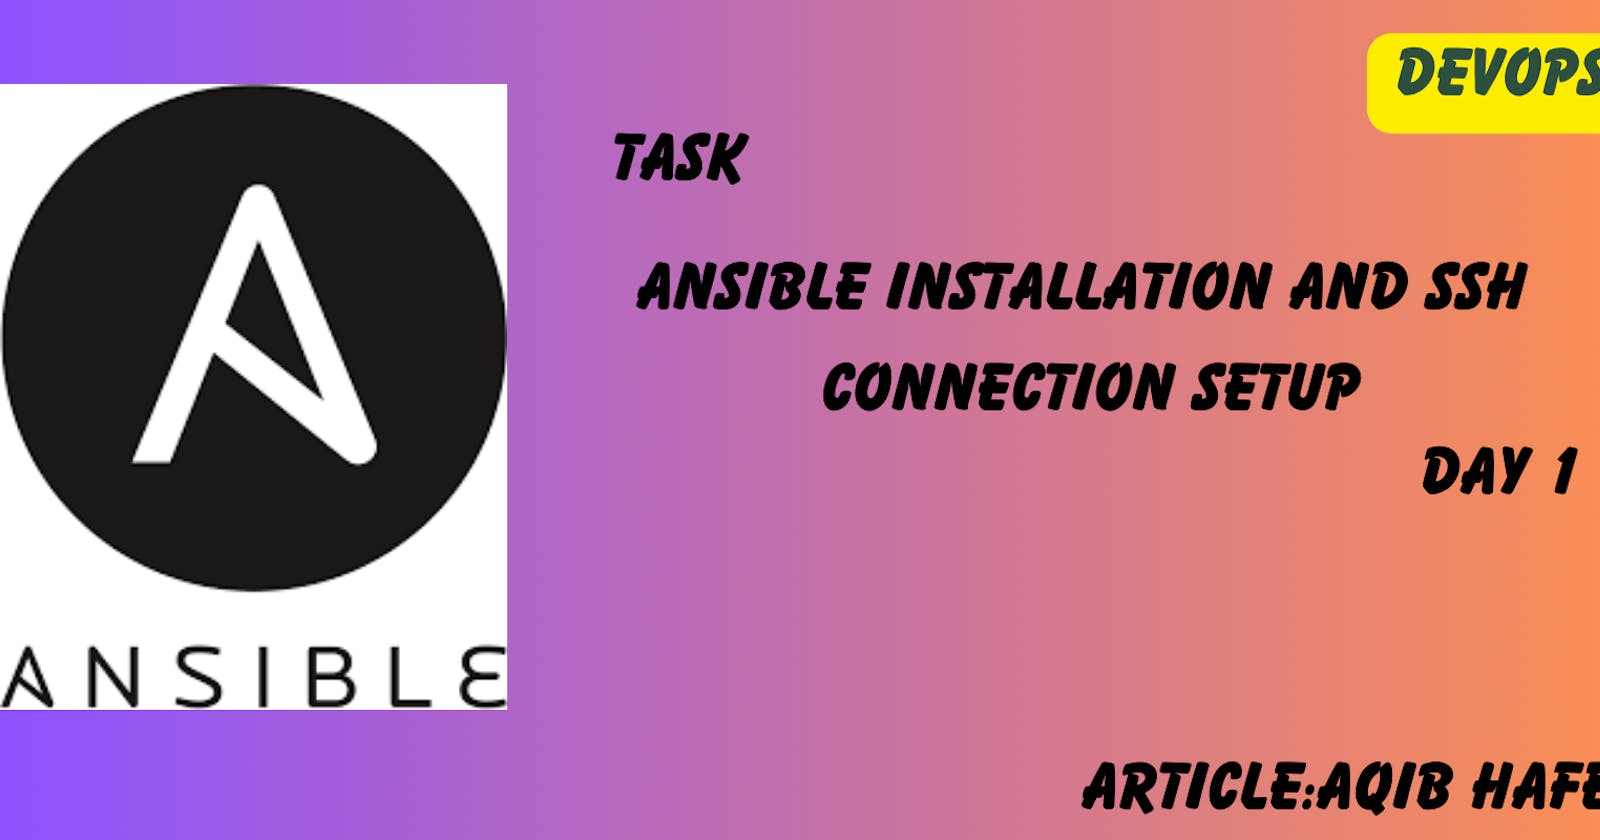 Day 1: Ansible Installation and SSH Connection Setup